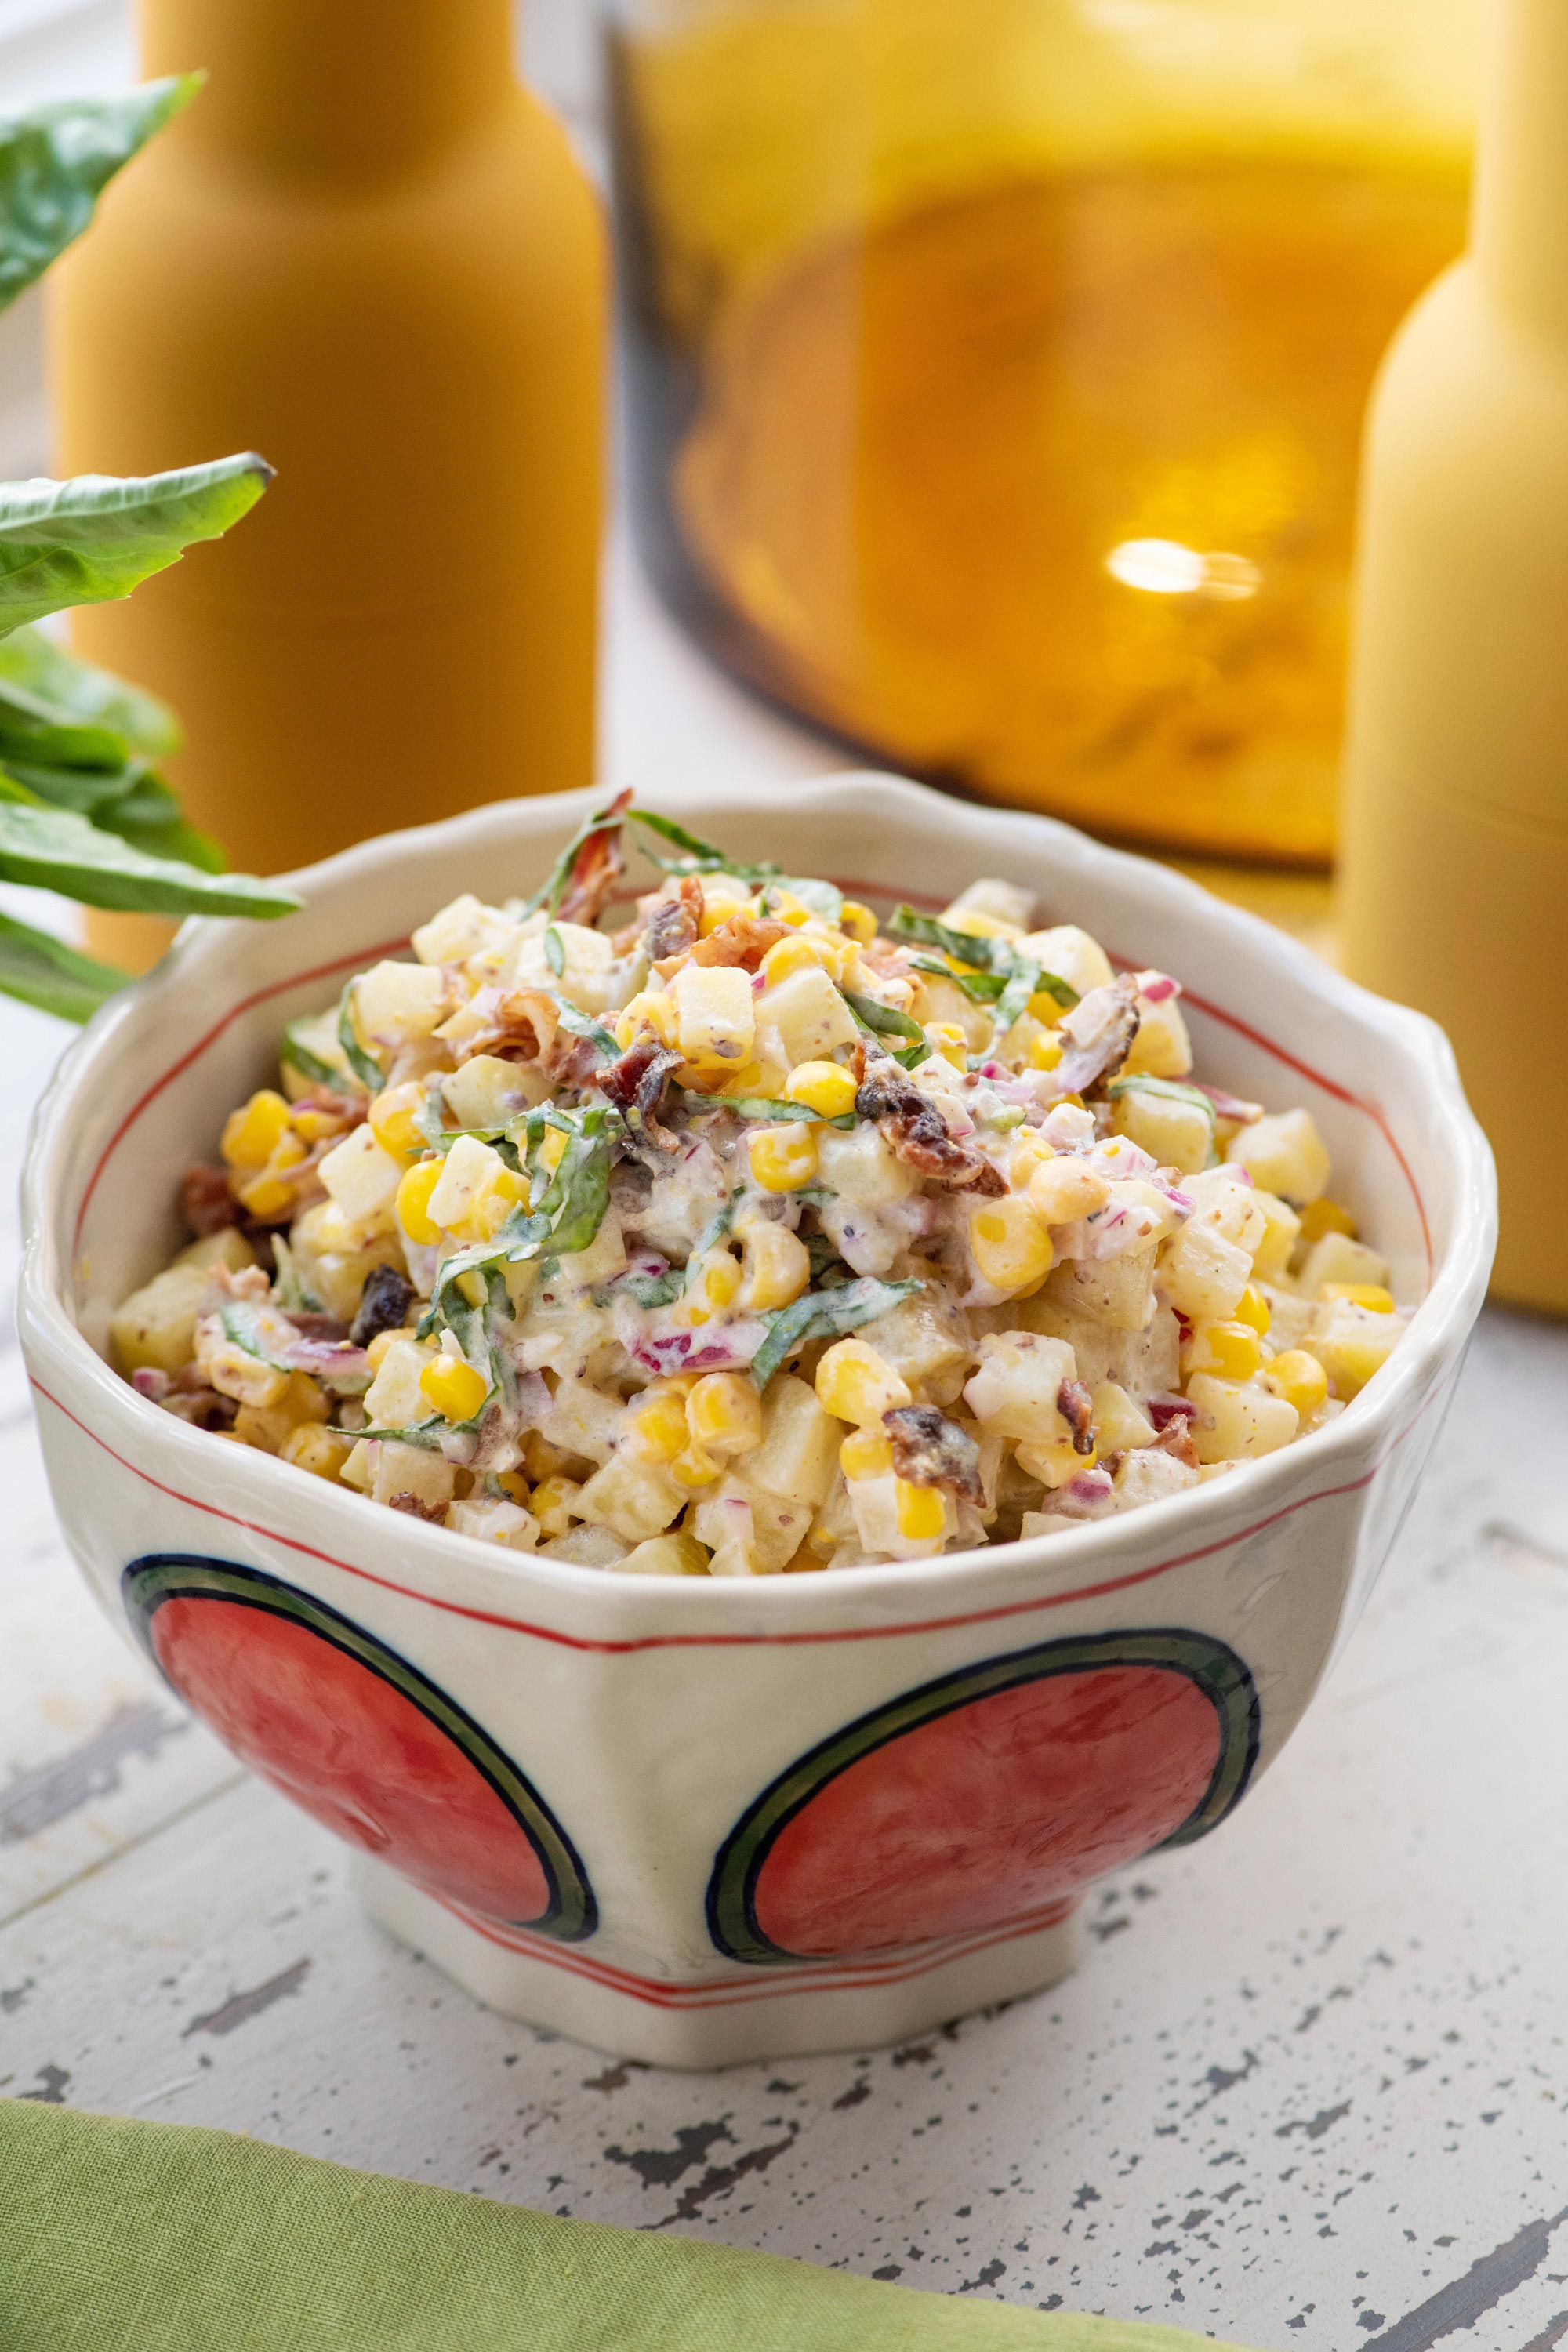 Bowl of Creamy Corn and Potato Salad with Bacon and Lemon Buttermilk Dressing.